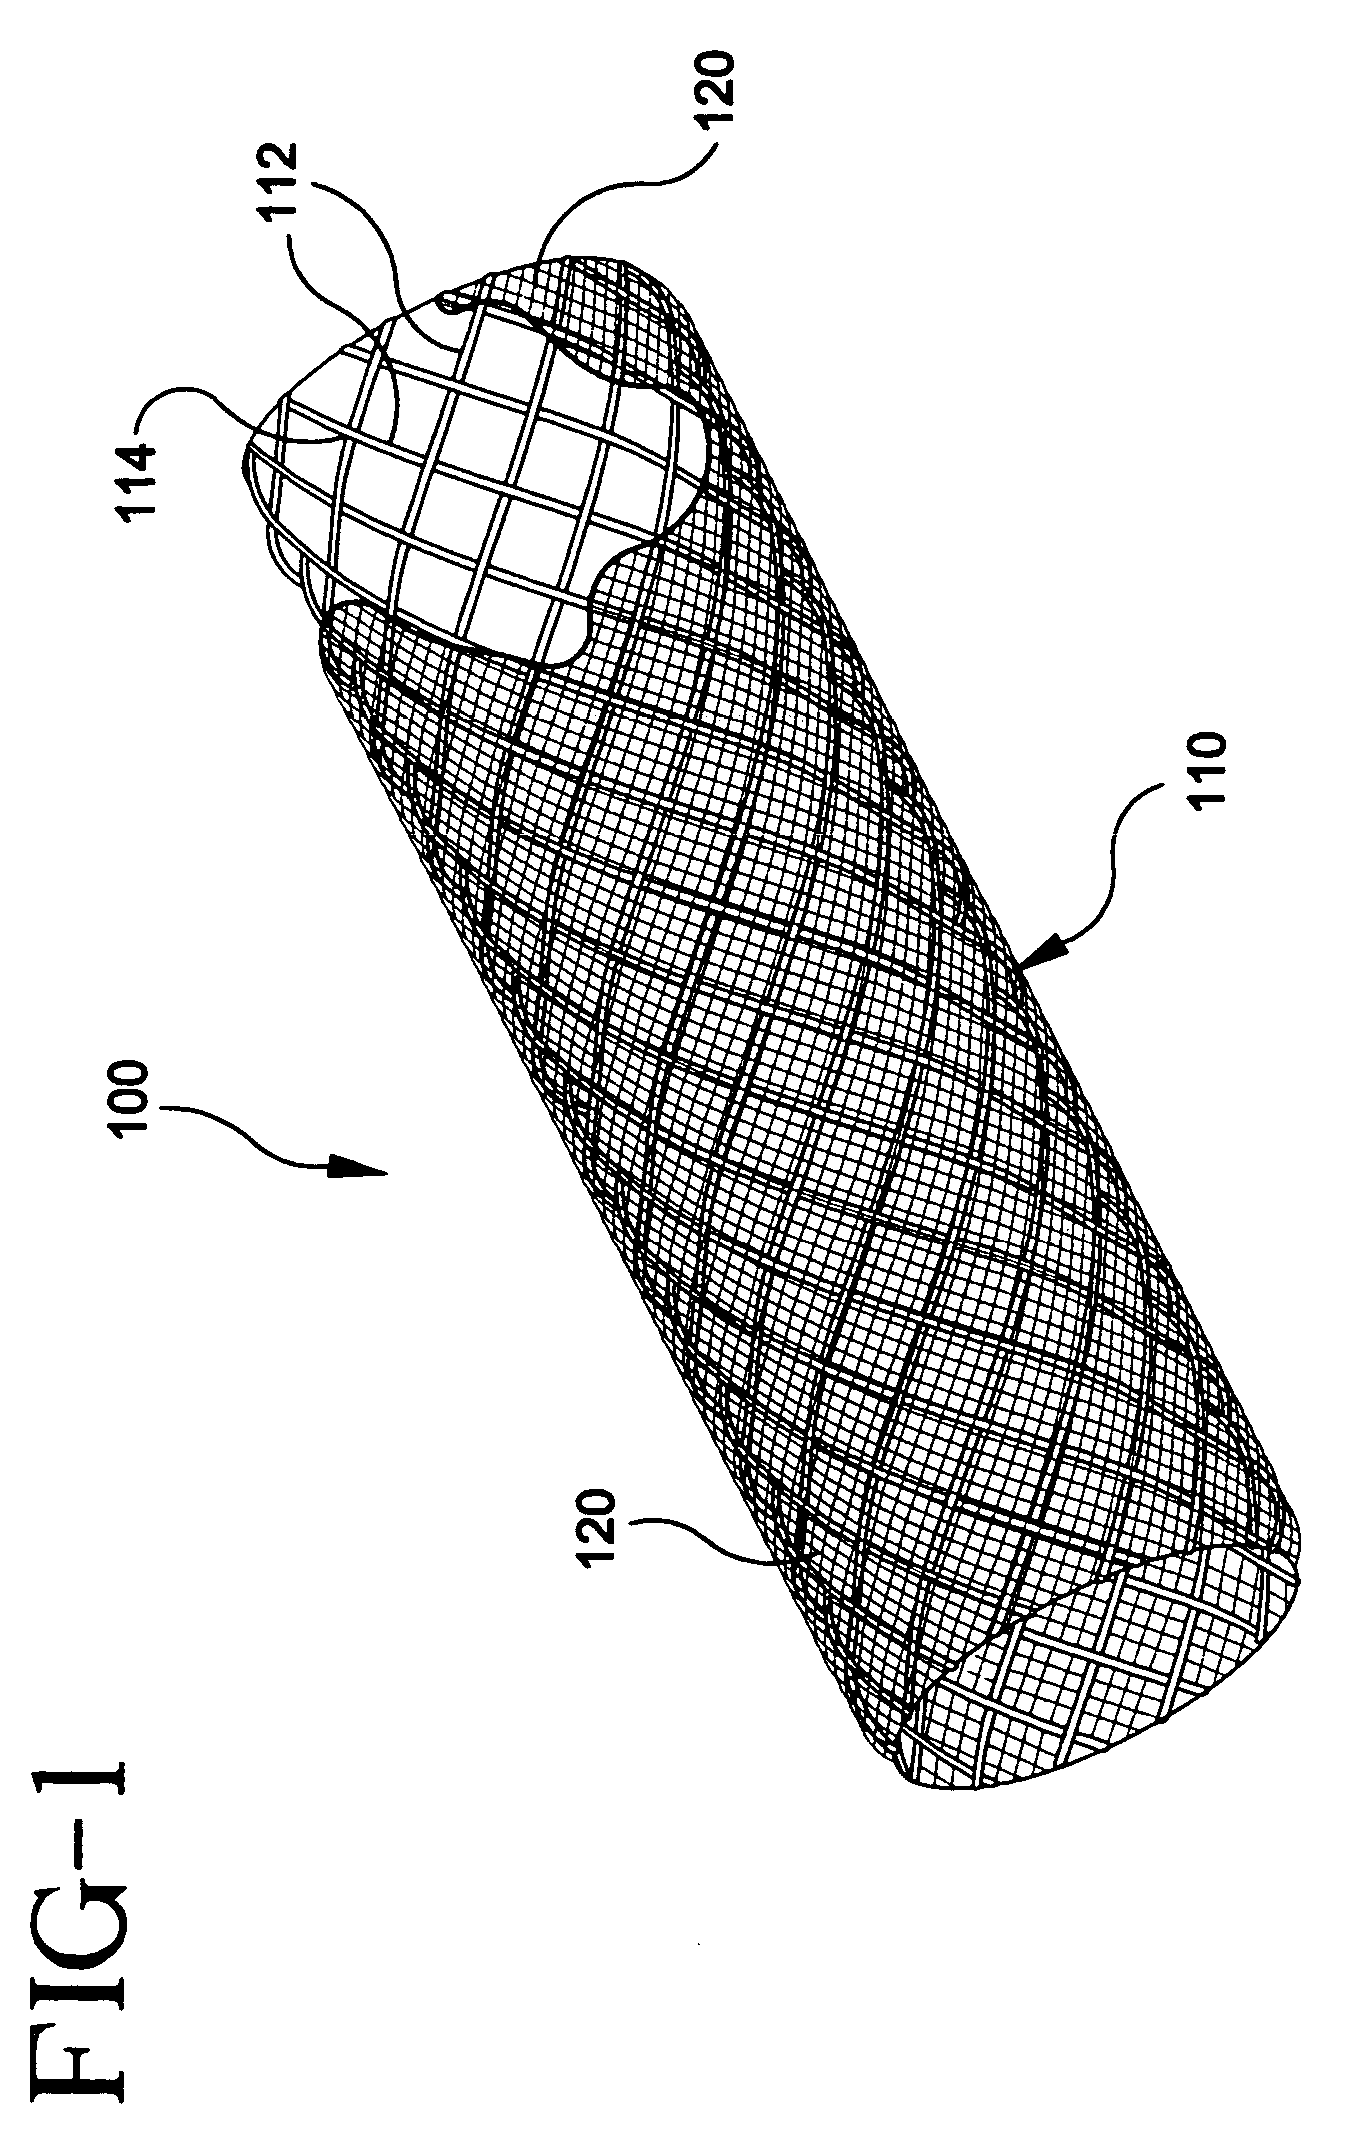 Stent-graft with bioabsorbable structural support